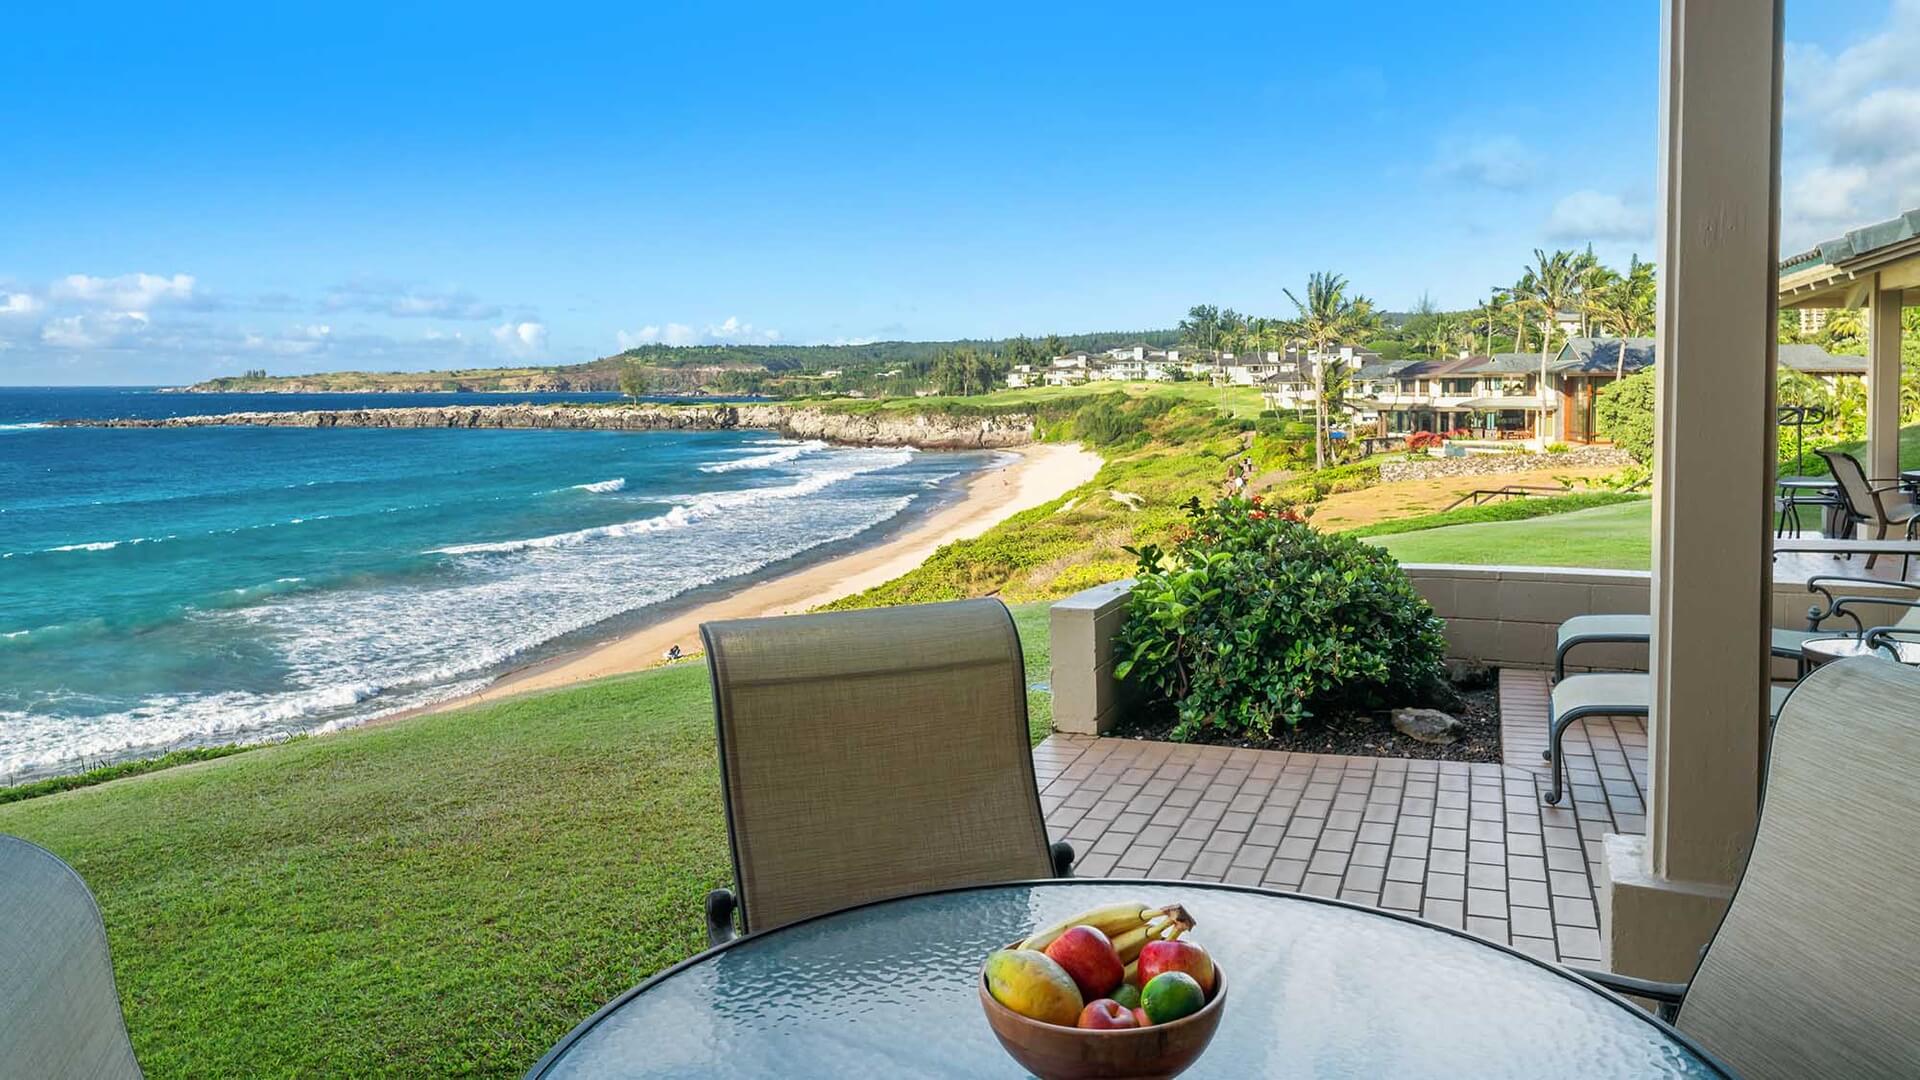 The view of the beach from one of Parrish Maui's vacation rentals in Kapalua